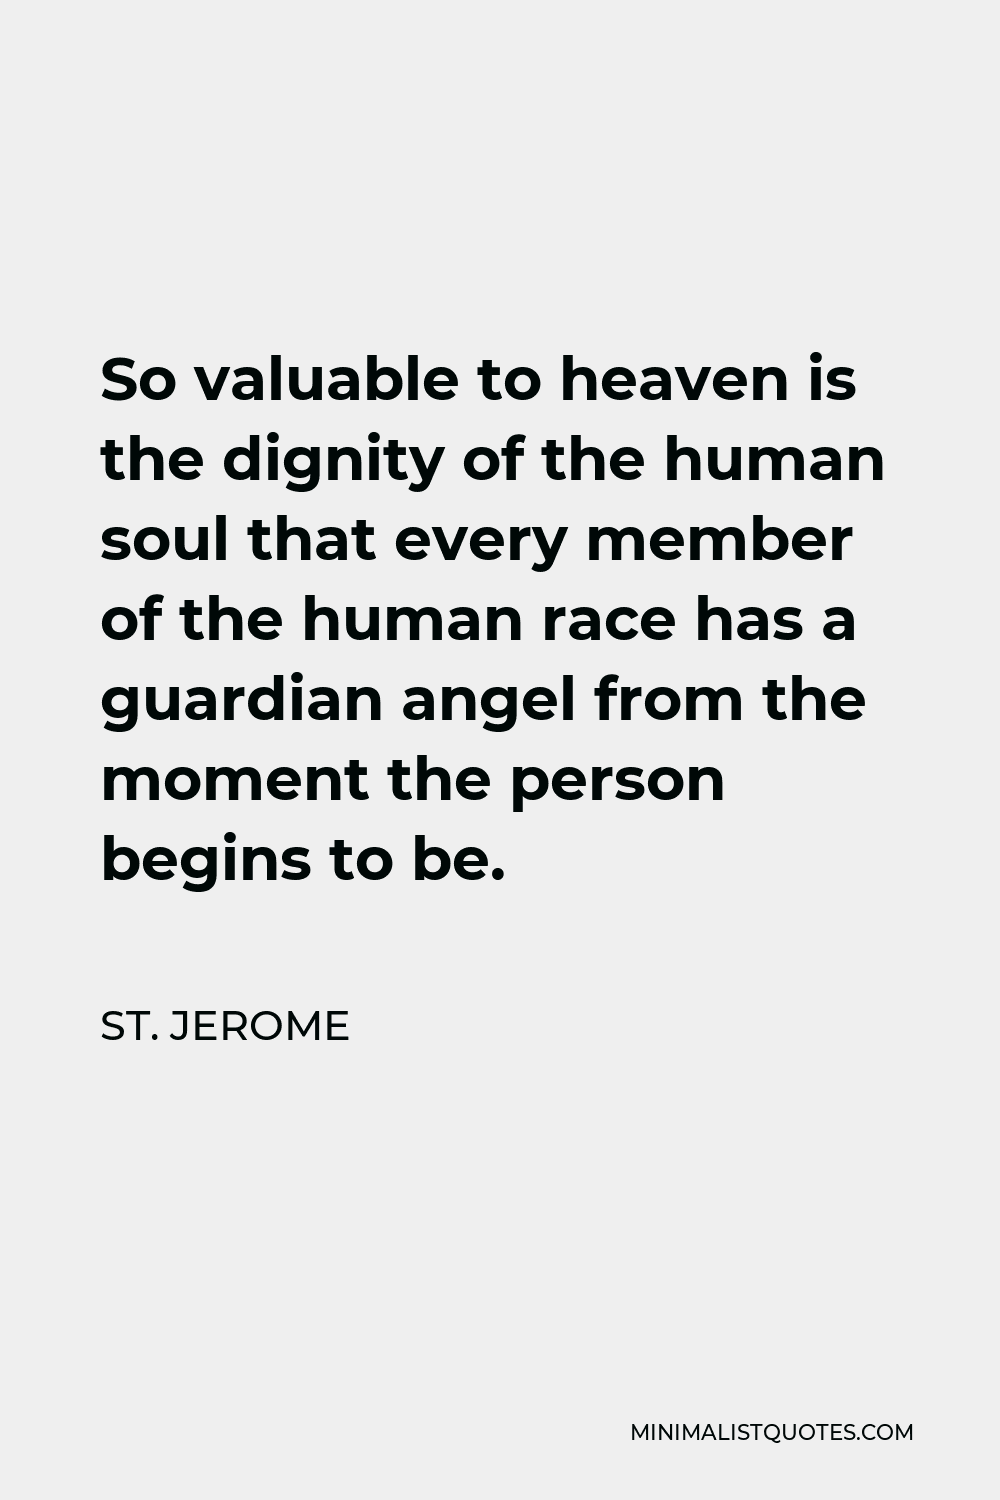 St. Jerome Quote - So valuable to heaven is the dignity of the human soul that every member of the human race has a guardian angel from the moment the person begins to be.